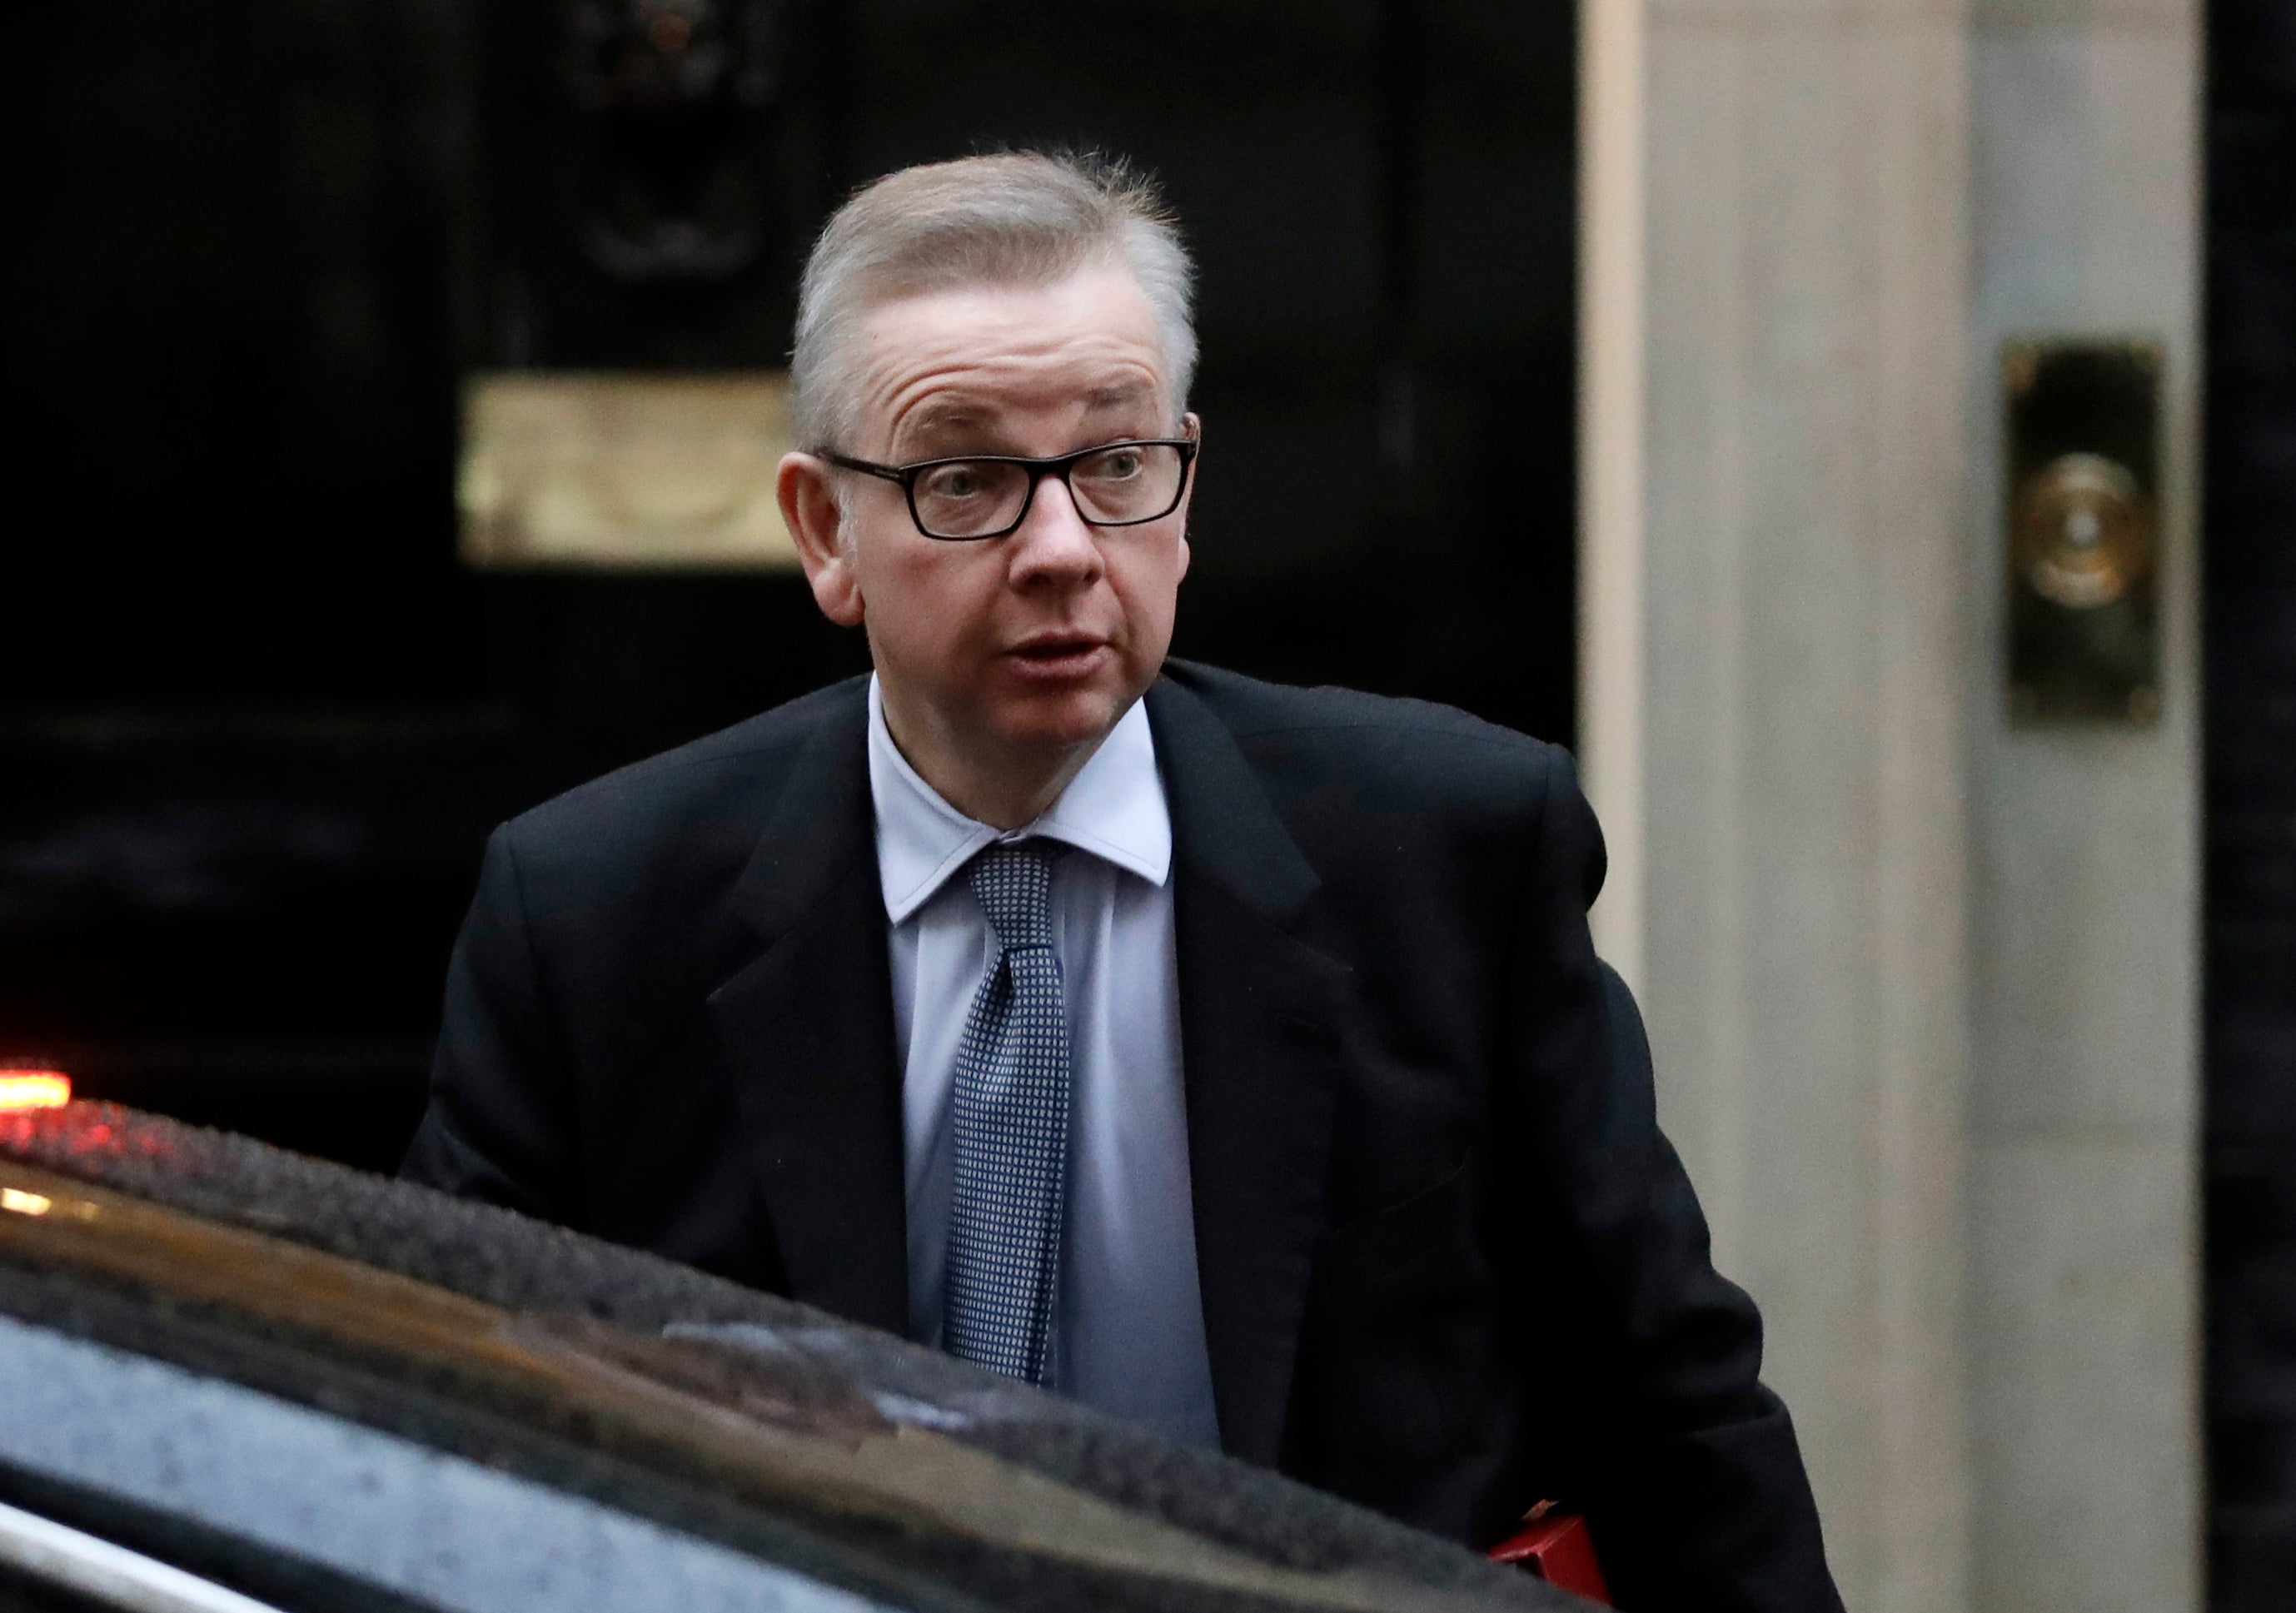 Campaigners have accused Michael Gove of a ‘power grab’